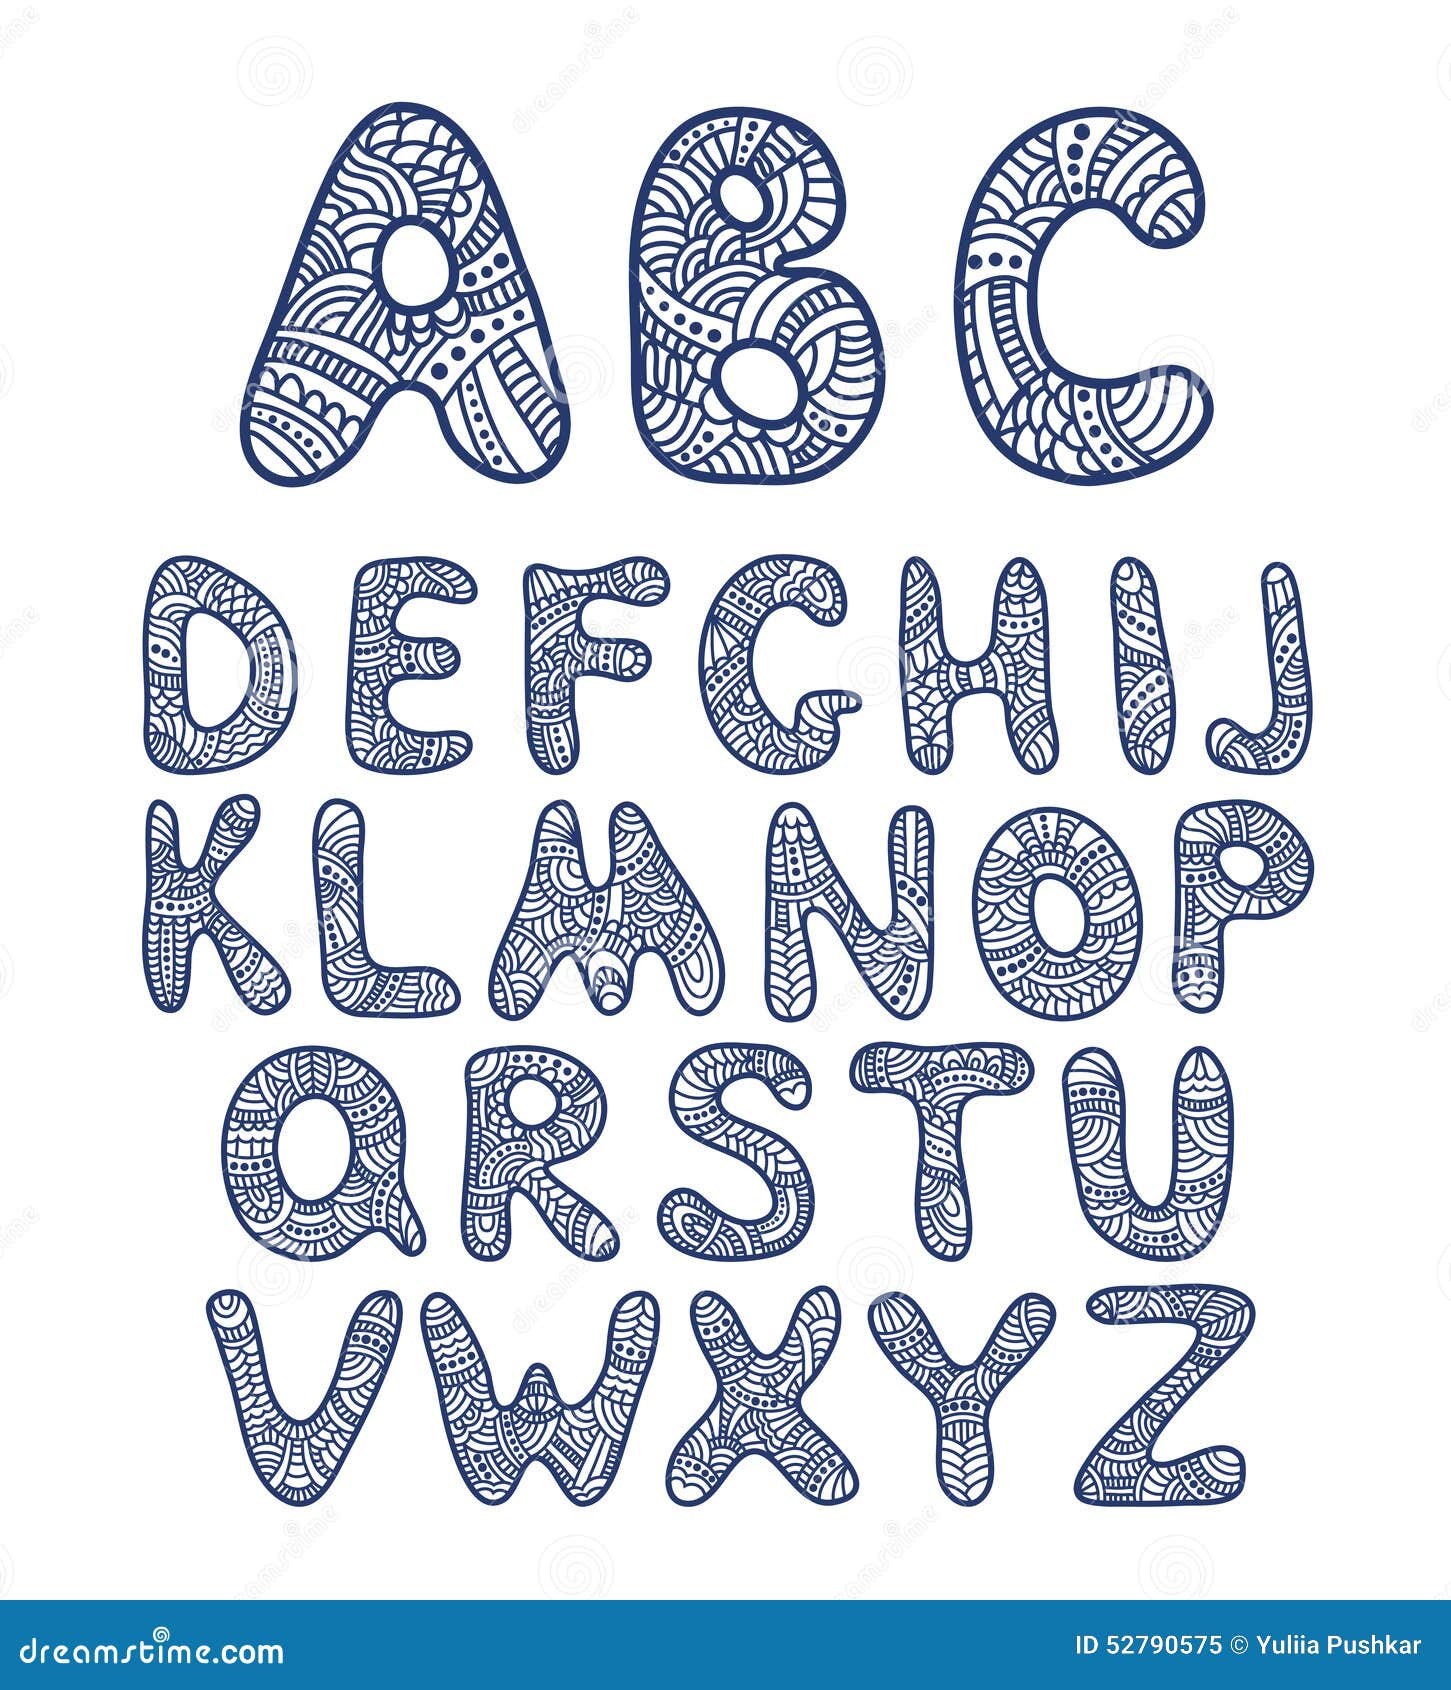 Doodle Hand Drawn Funny Alphabet Stock Vector - Illustration of ...